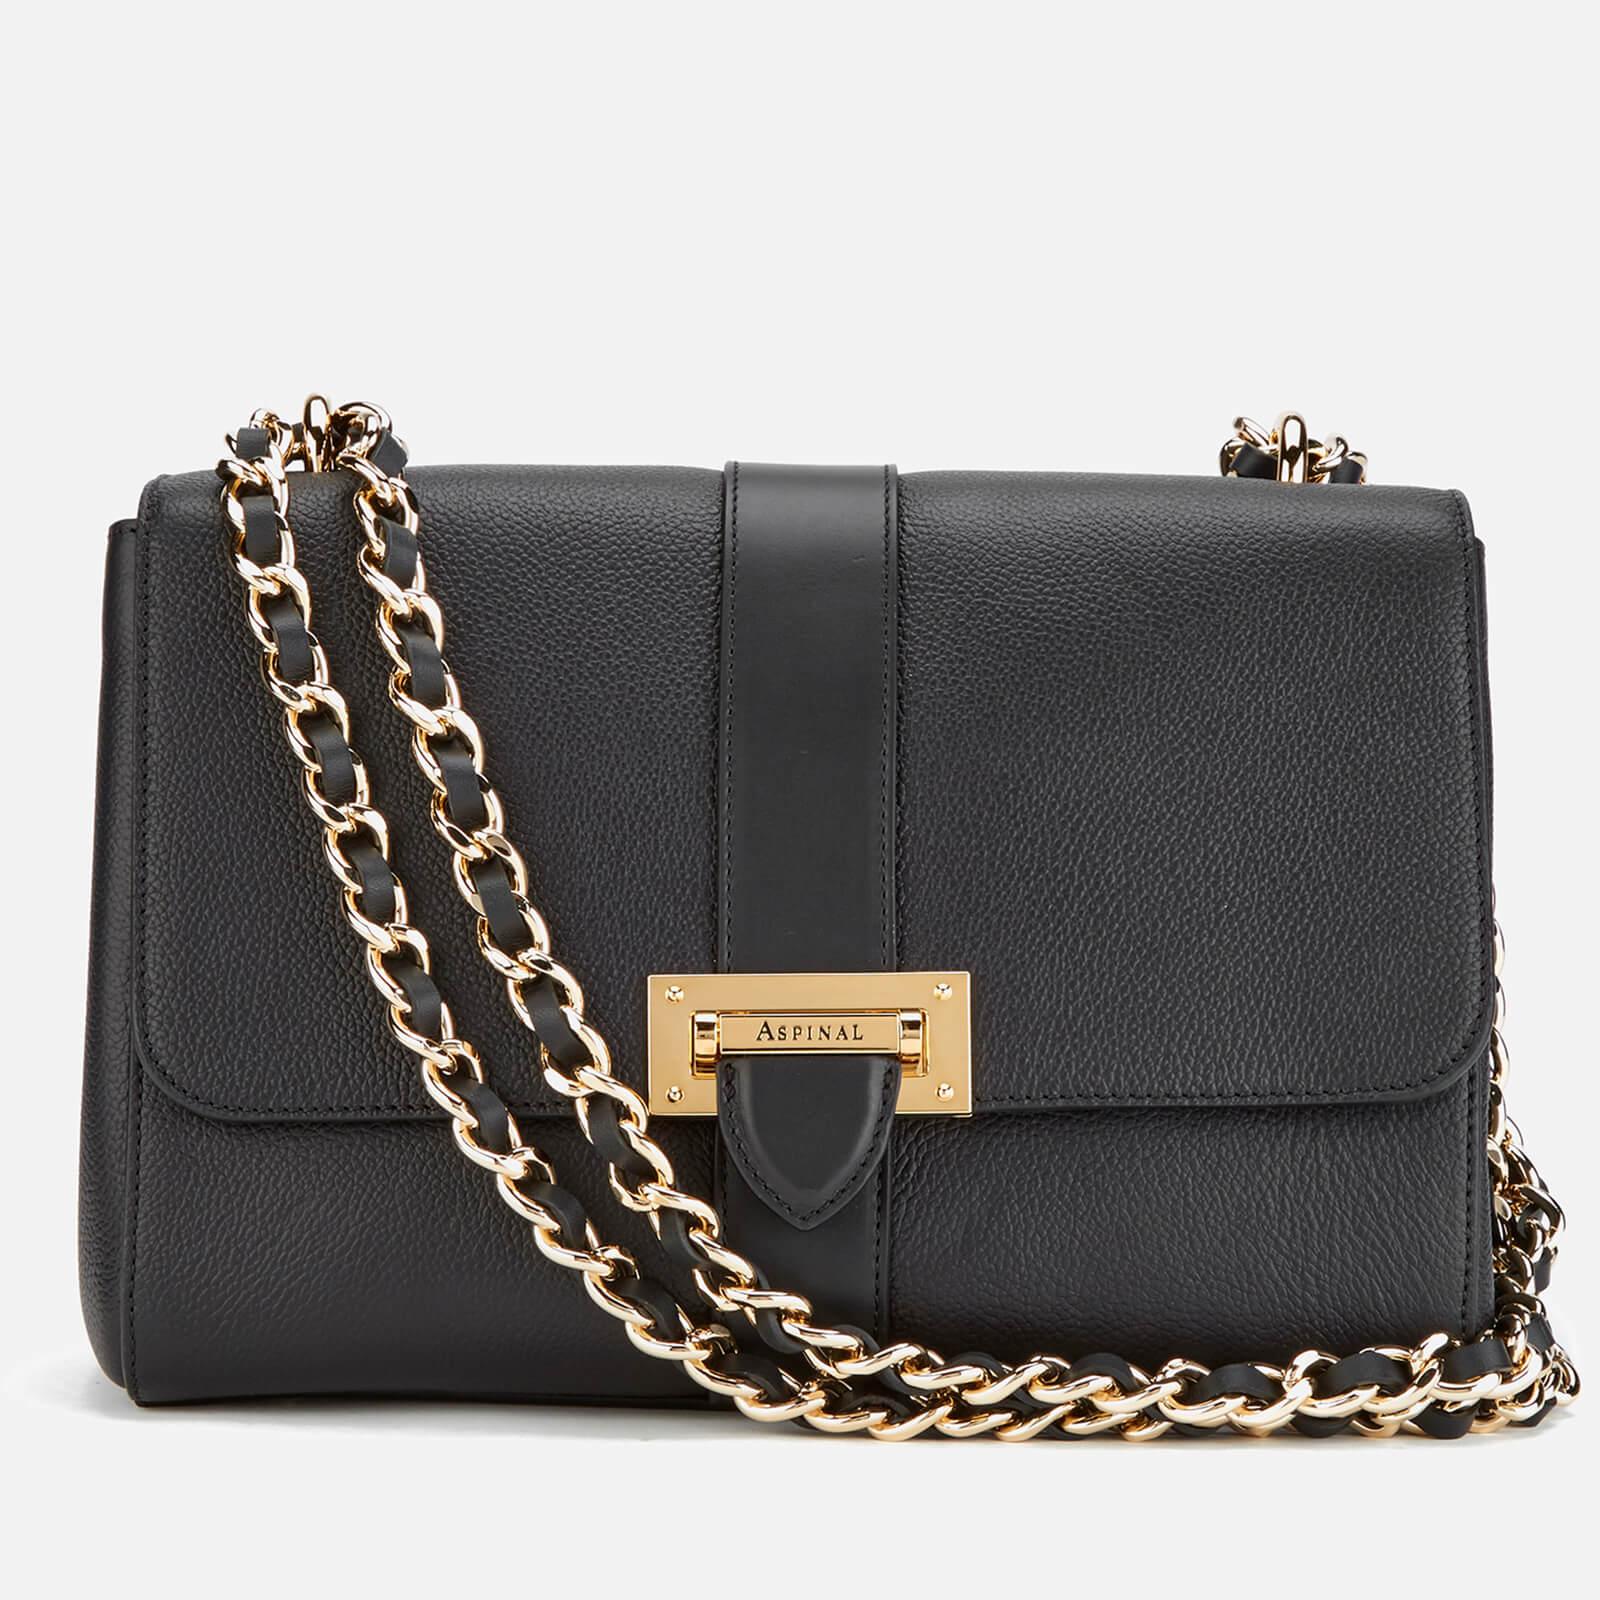 Aspinal of London Lottie Large Bag - Lyst